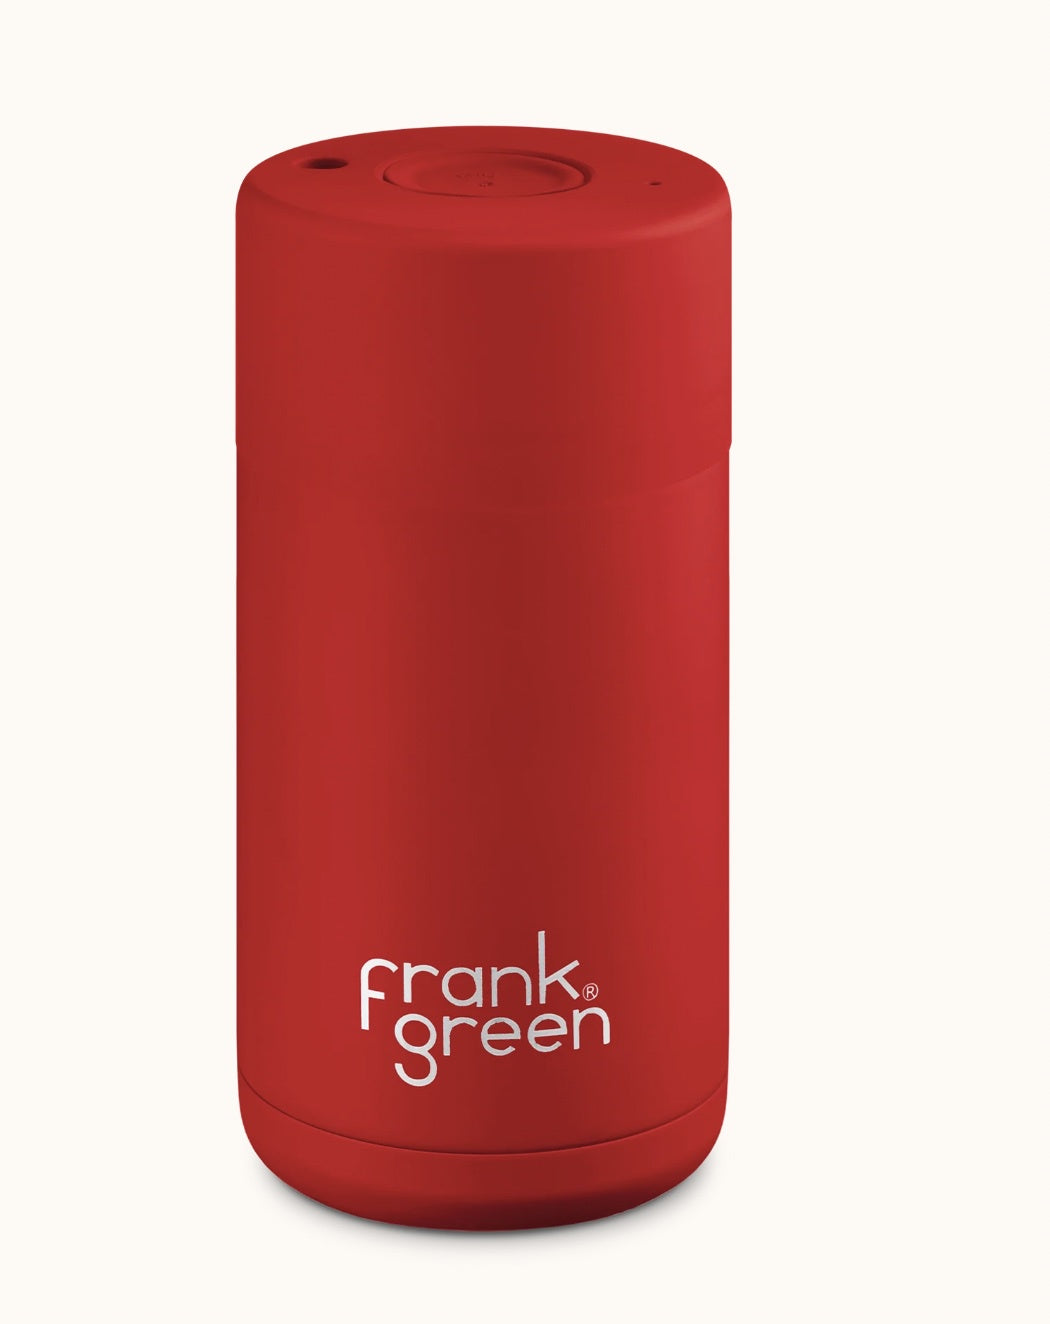 Limited Edition RED 12oz Stainless Steel Ceramic Reusable Cup - ATOMIC RED Drink Bottles Frank Green   